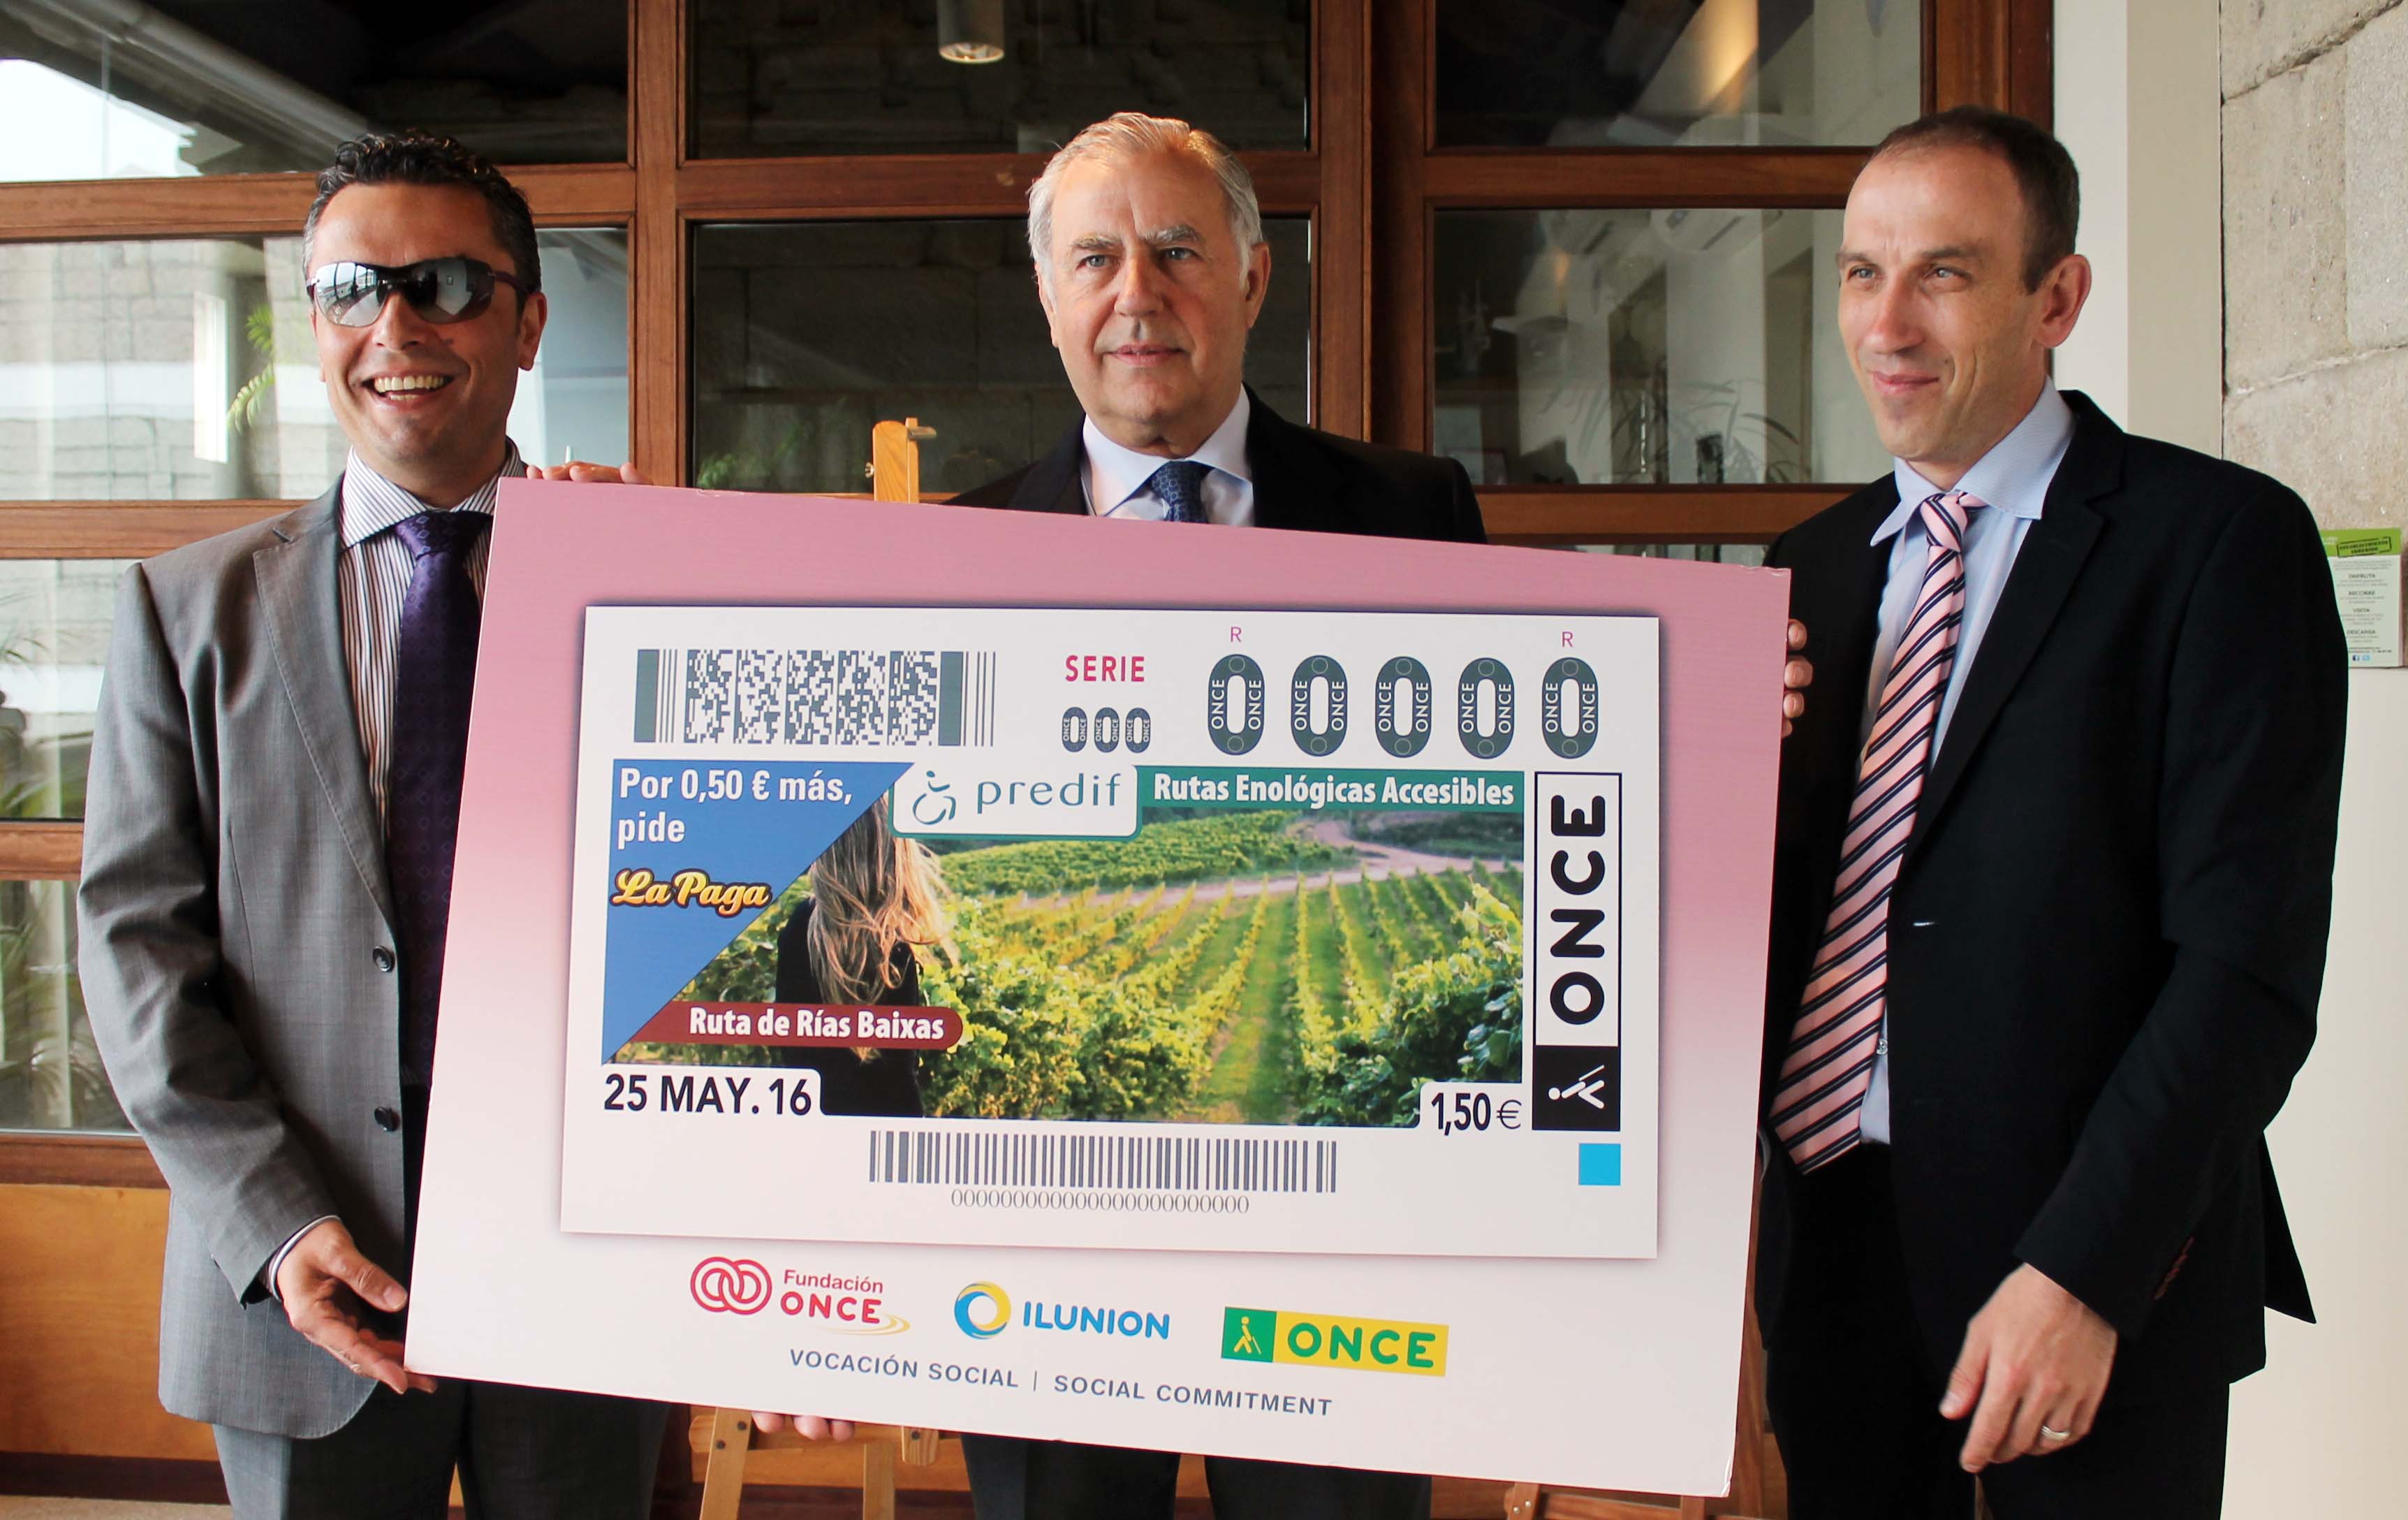 ONCE dedicates 5.5 million lottery tickets to the Accessible Wine Route of Rías Baixas